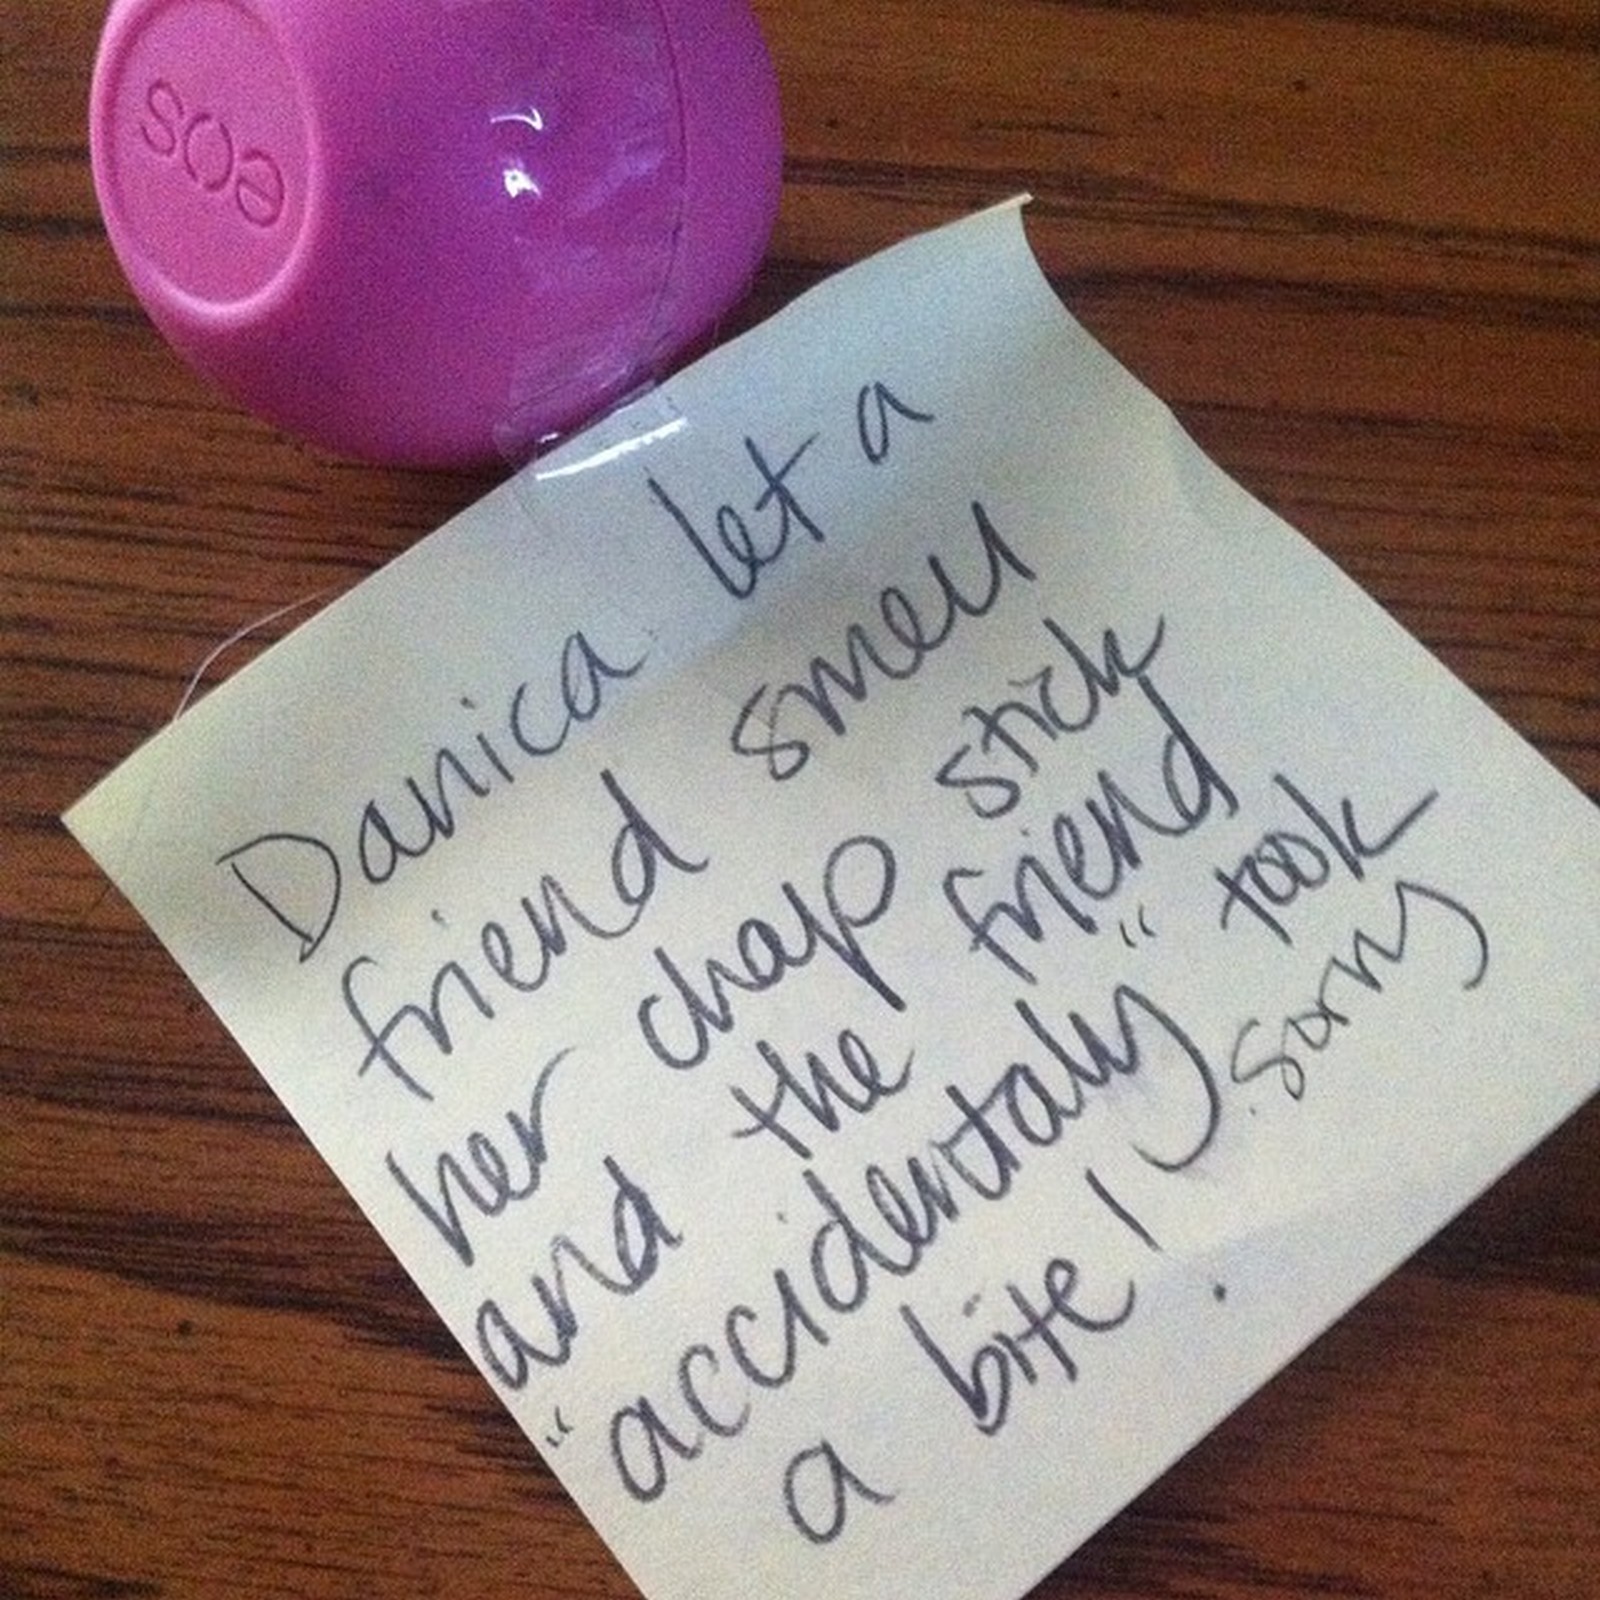 17 Teacher Notes - Her lip balm must have smelled delicious!